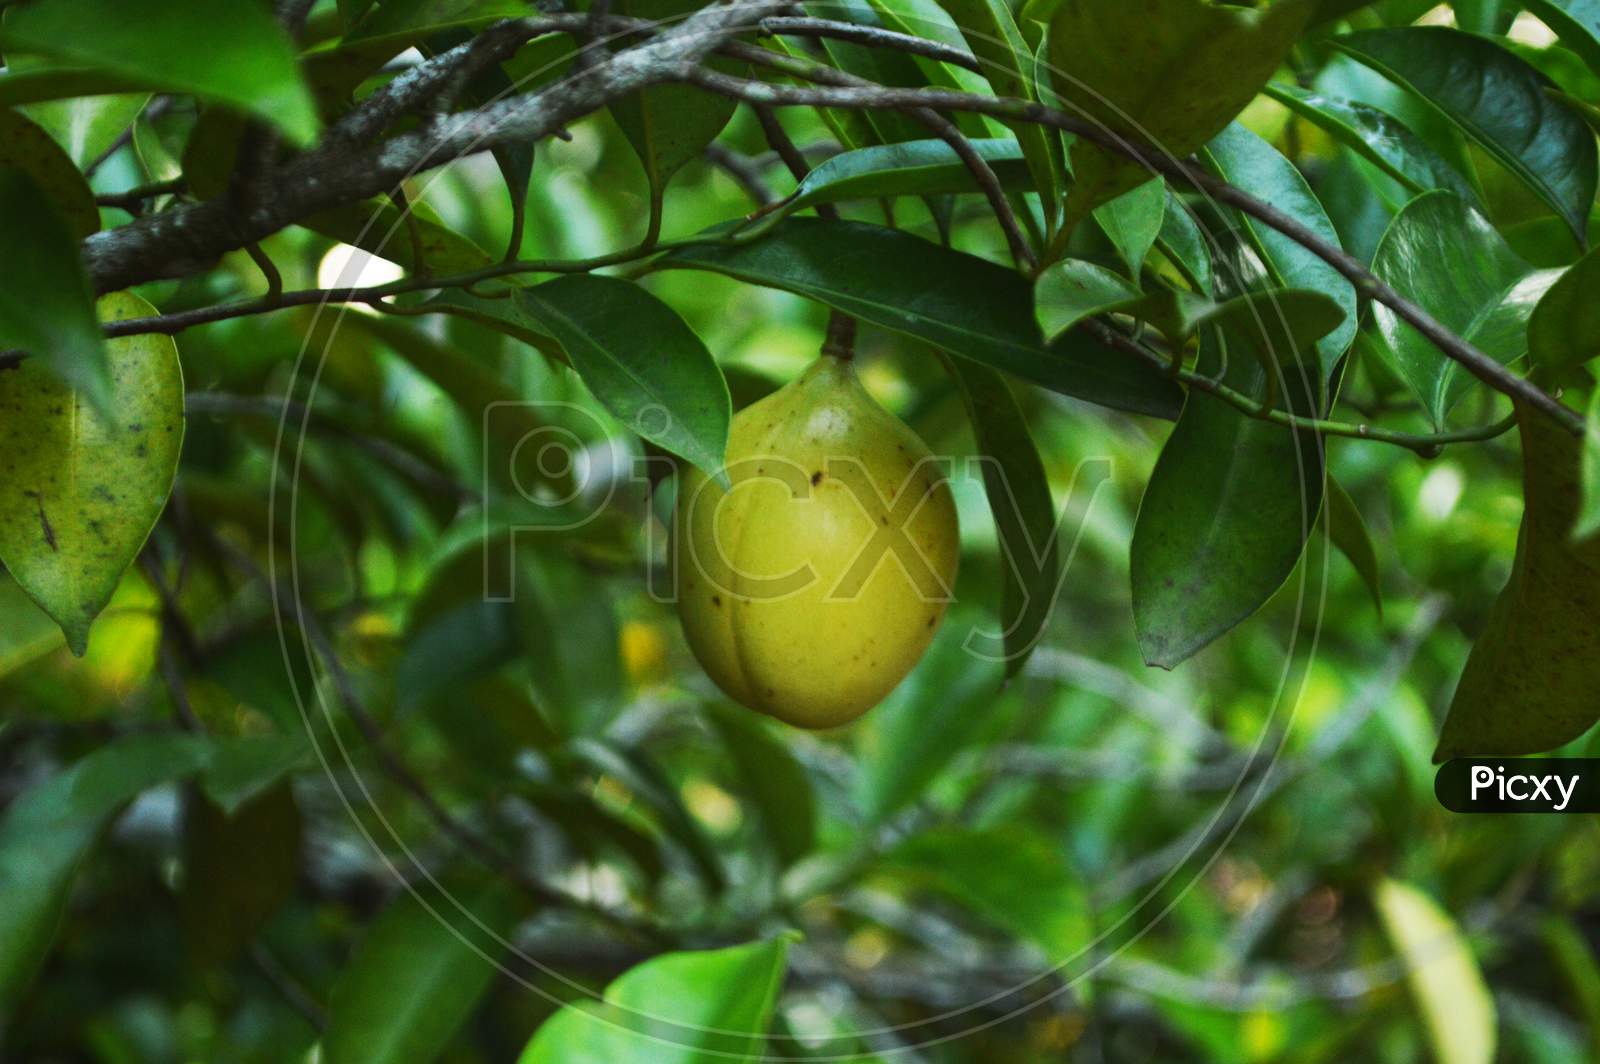 View Of Raw Nutmeg In A Blurred Background